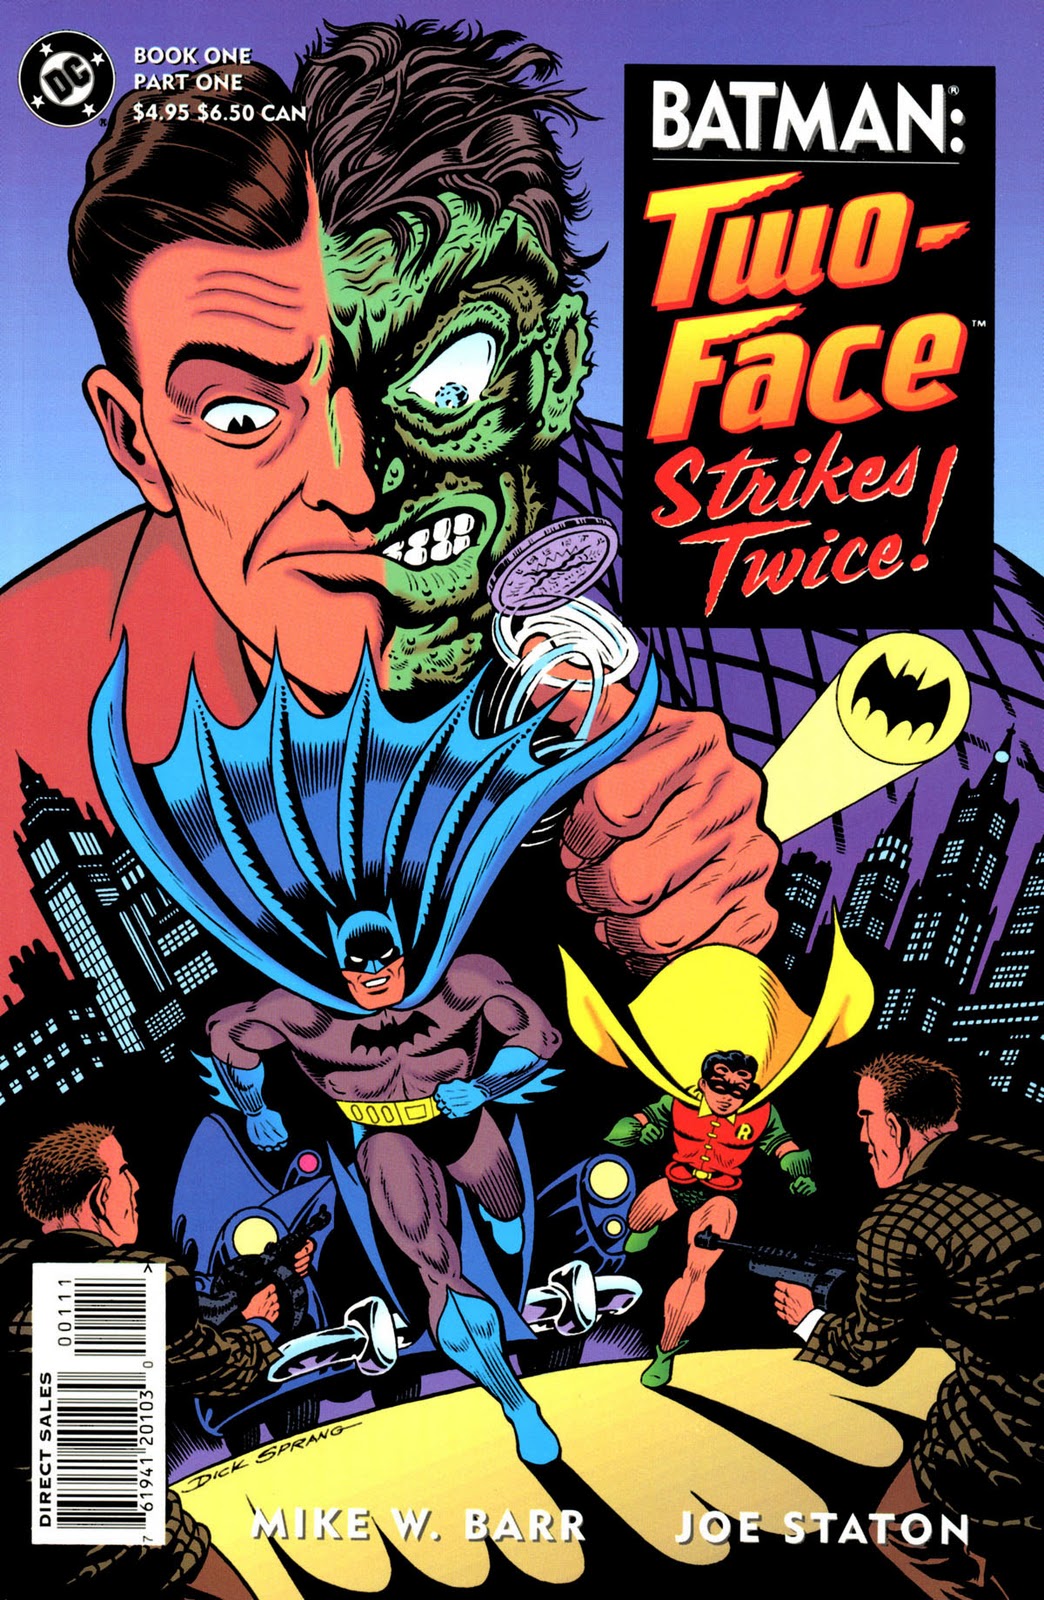 Batman: Two Face Strikes Twice #1 (1993) Cover